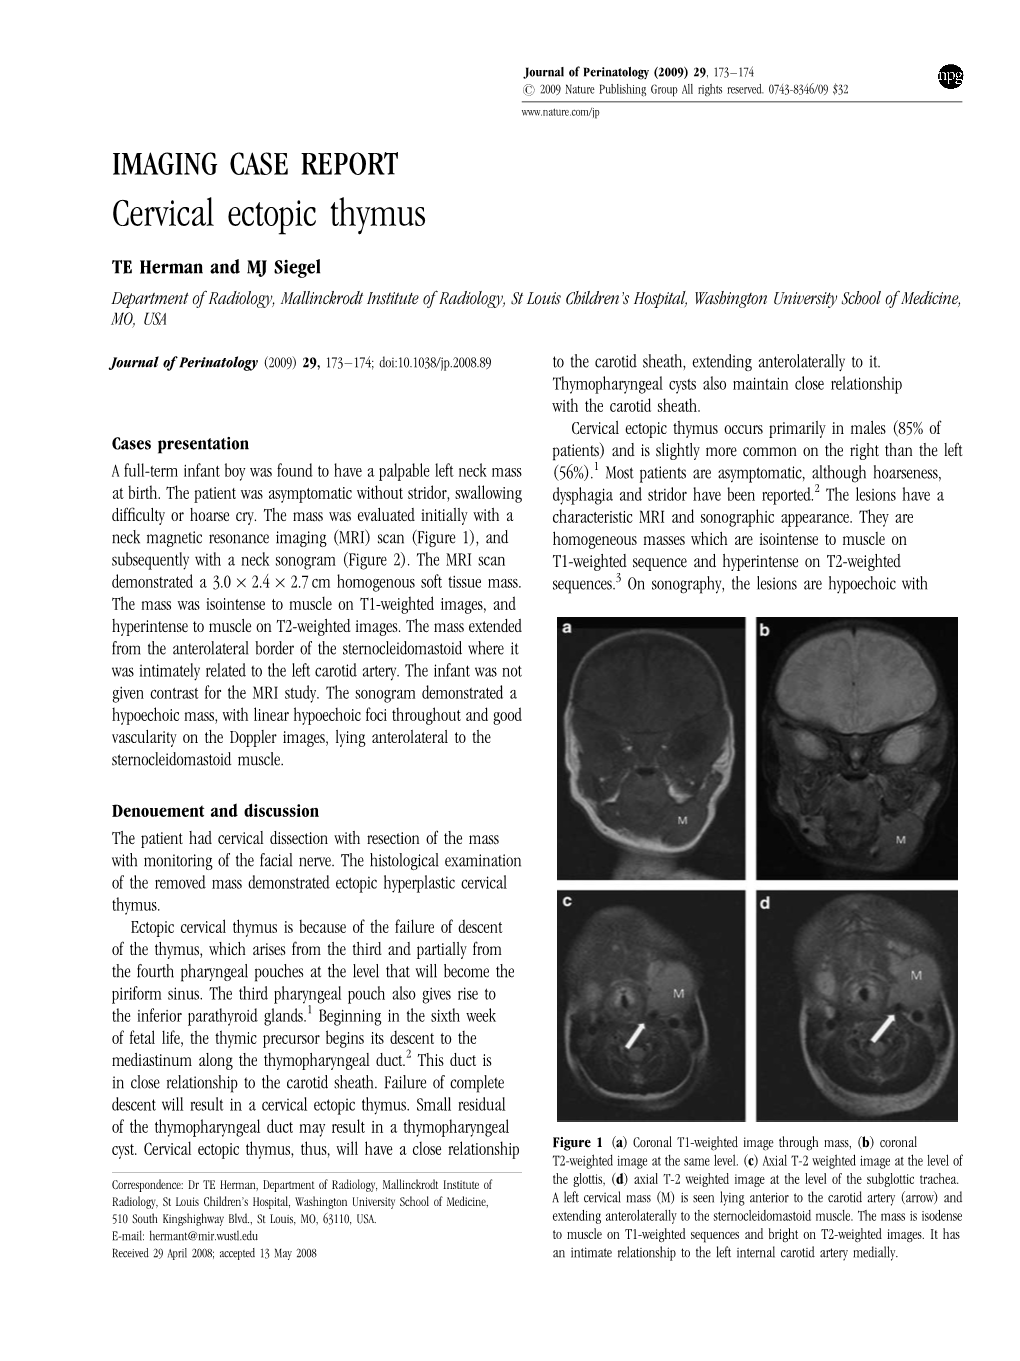 Cervical Ectopic Thymus